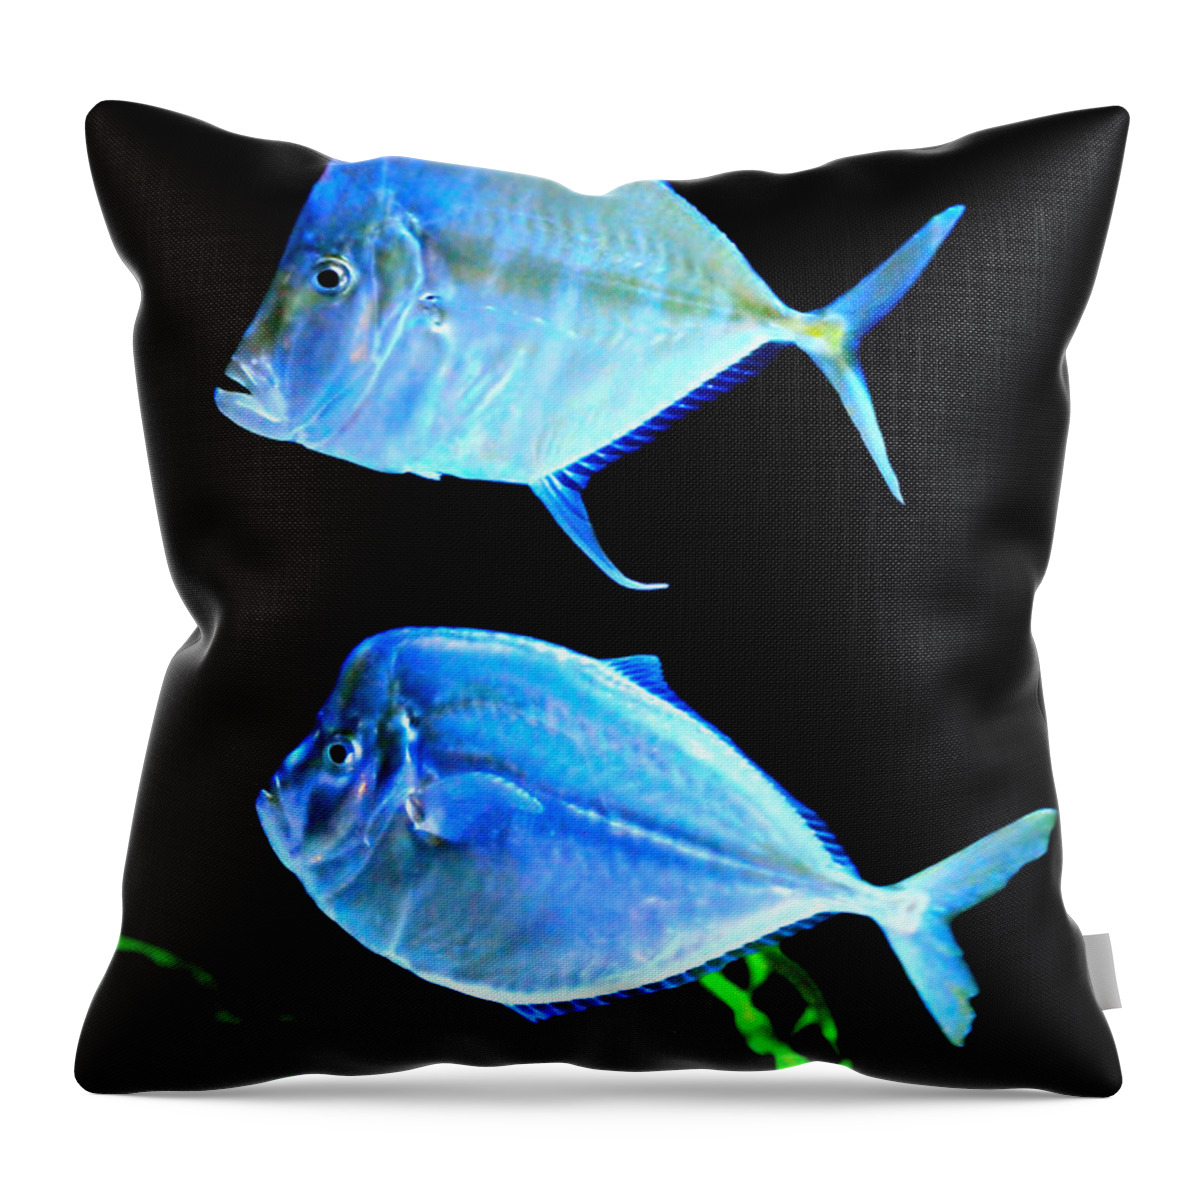 Fish Throw Pillow featuring the photograph Two Fish Blue Fish by Diana Angstadt